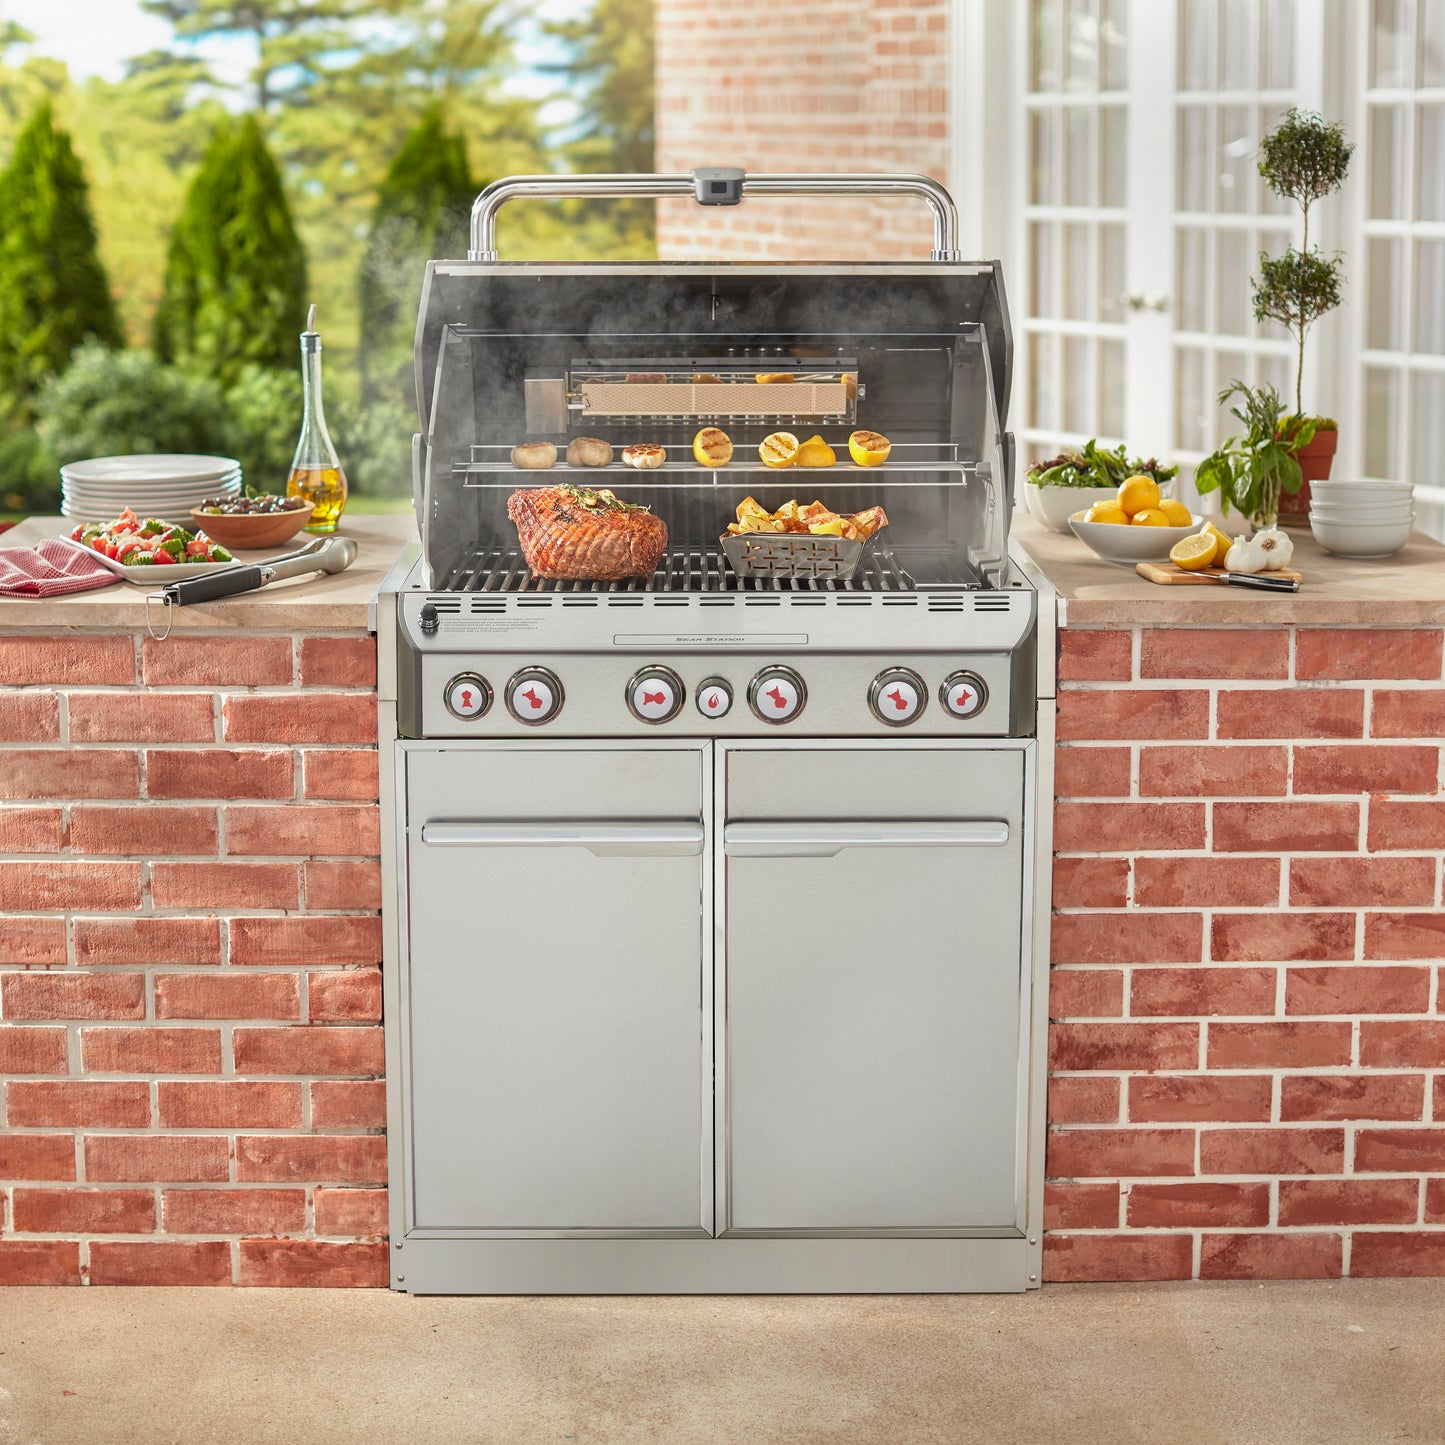 Weber Summit S-460 Built-In Gas Grill - Propane